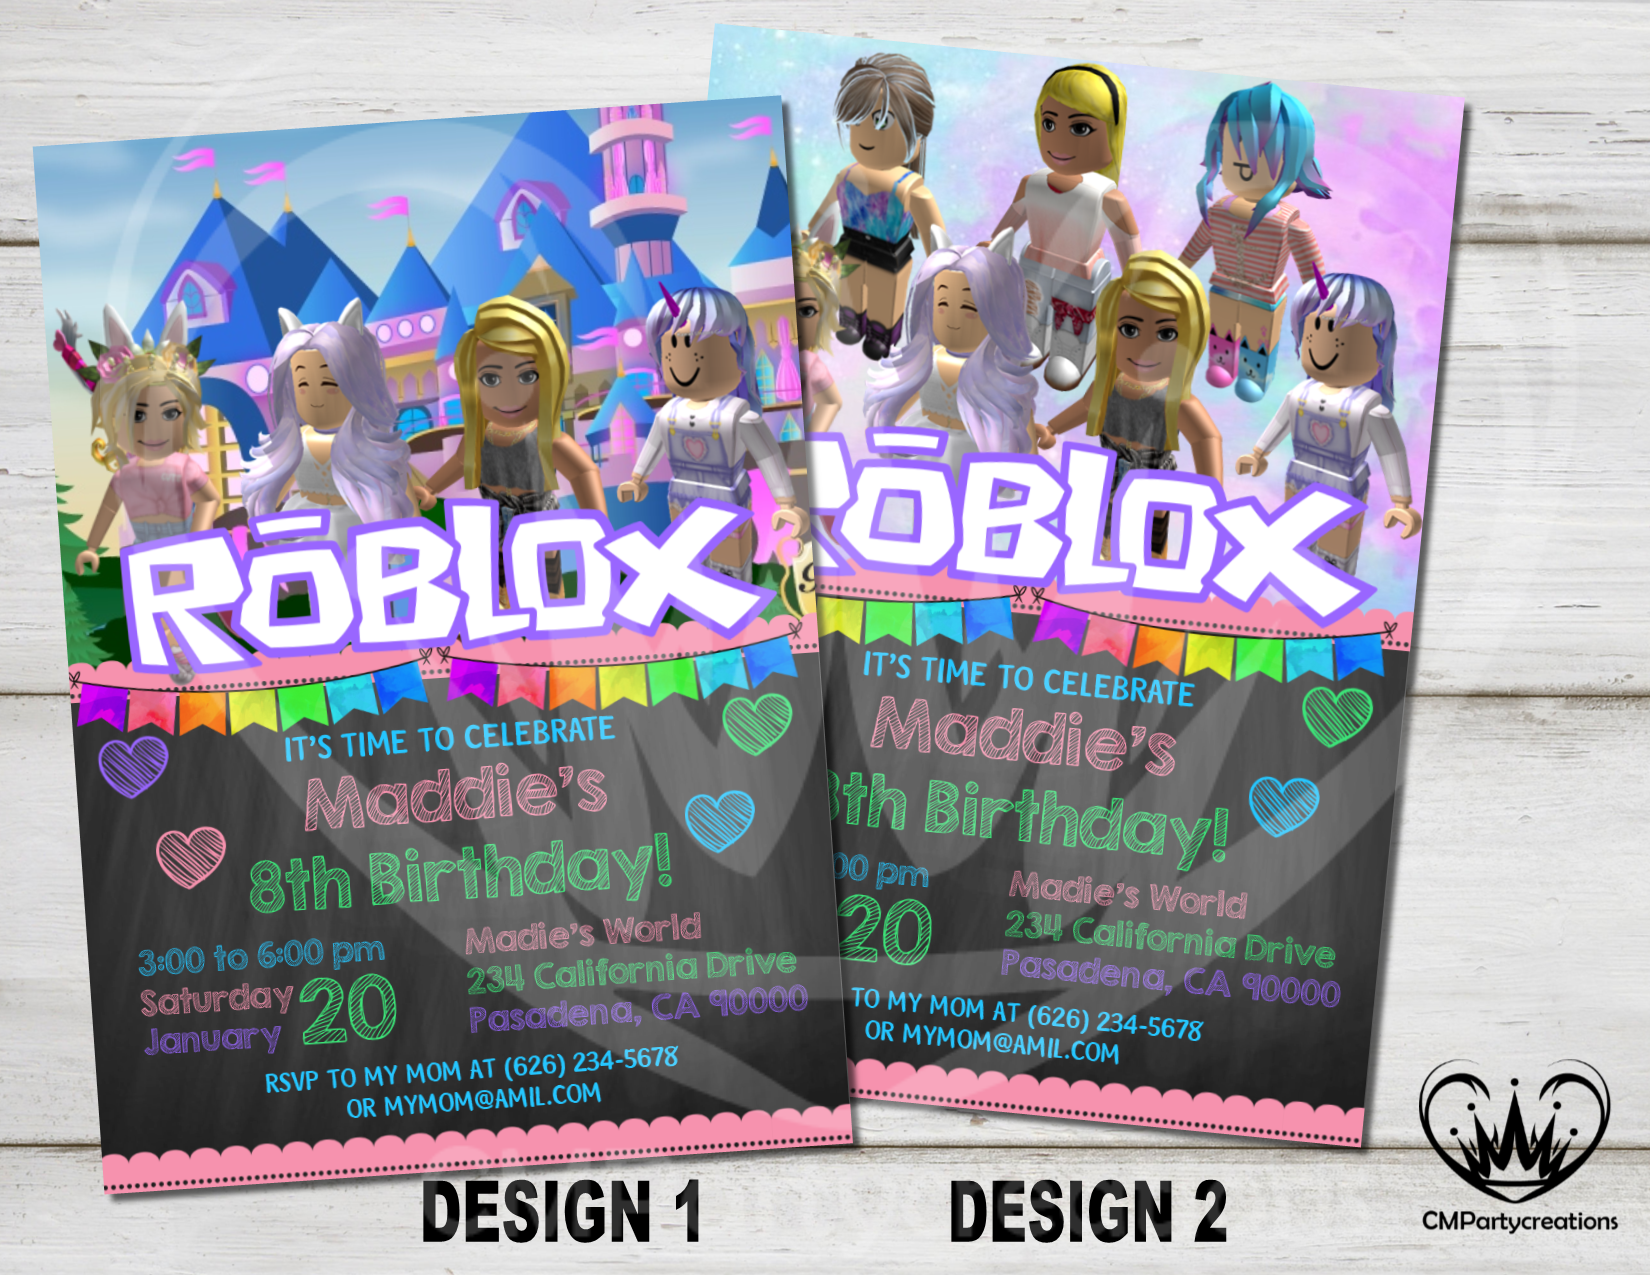 Roblox Invitation Birthday Party Cmpartycreations - robuxparty.com